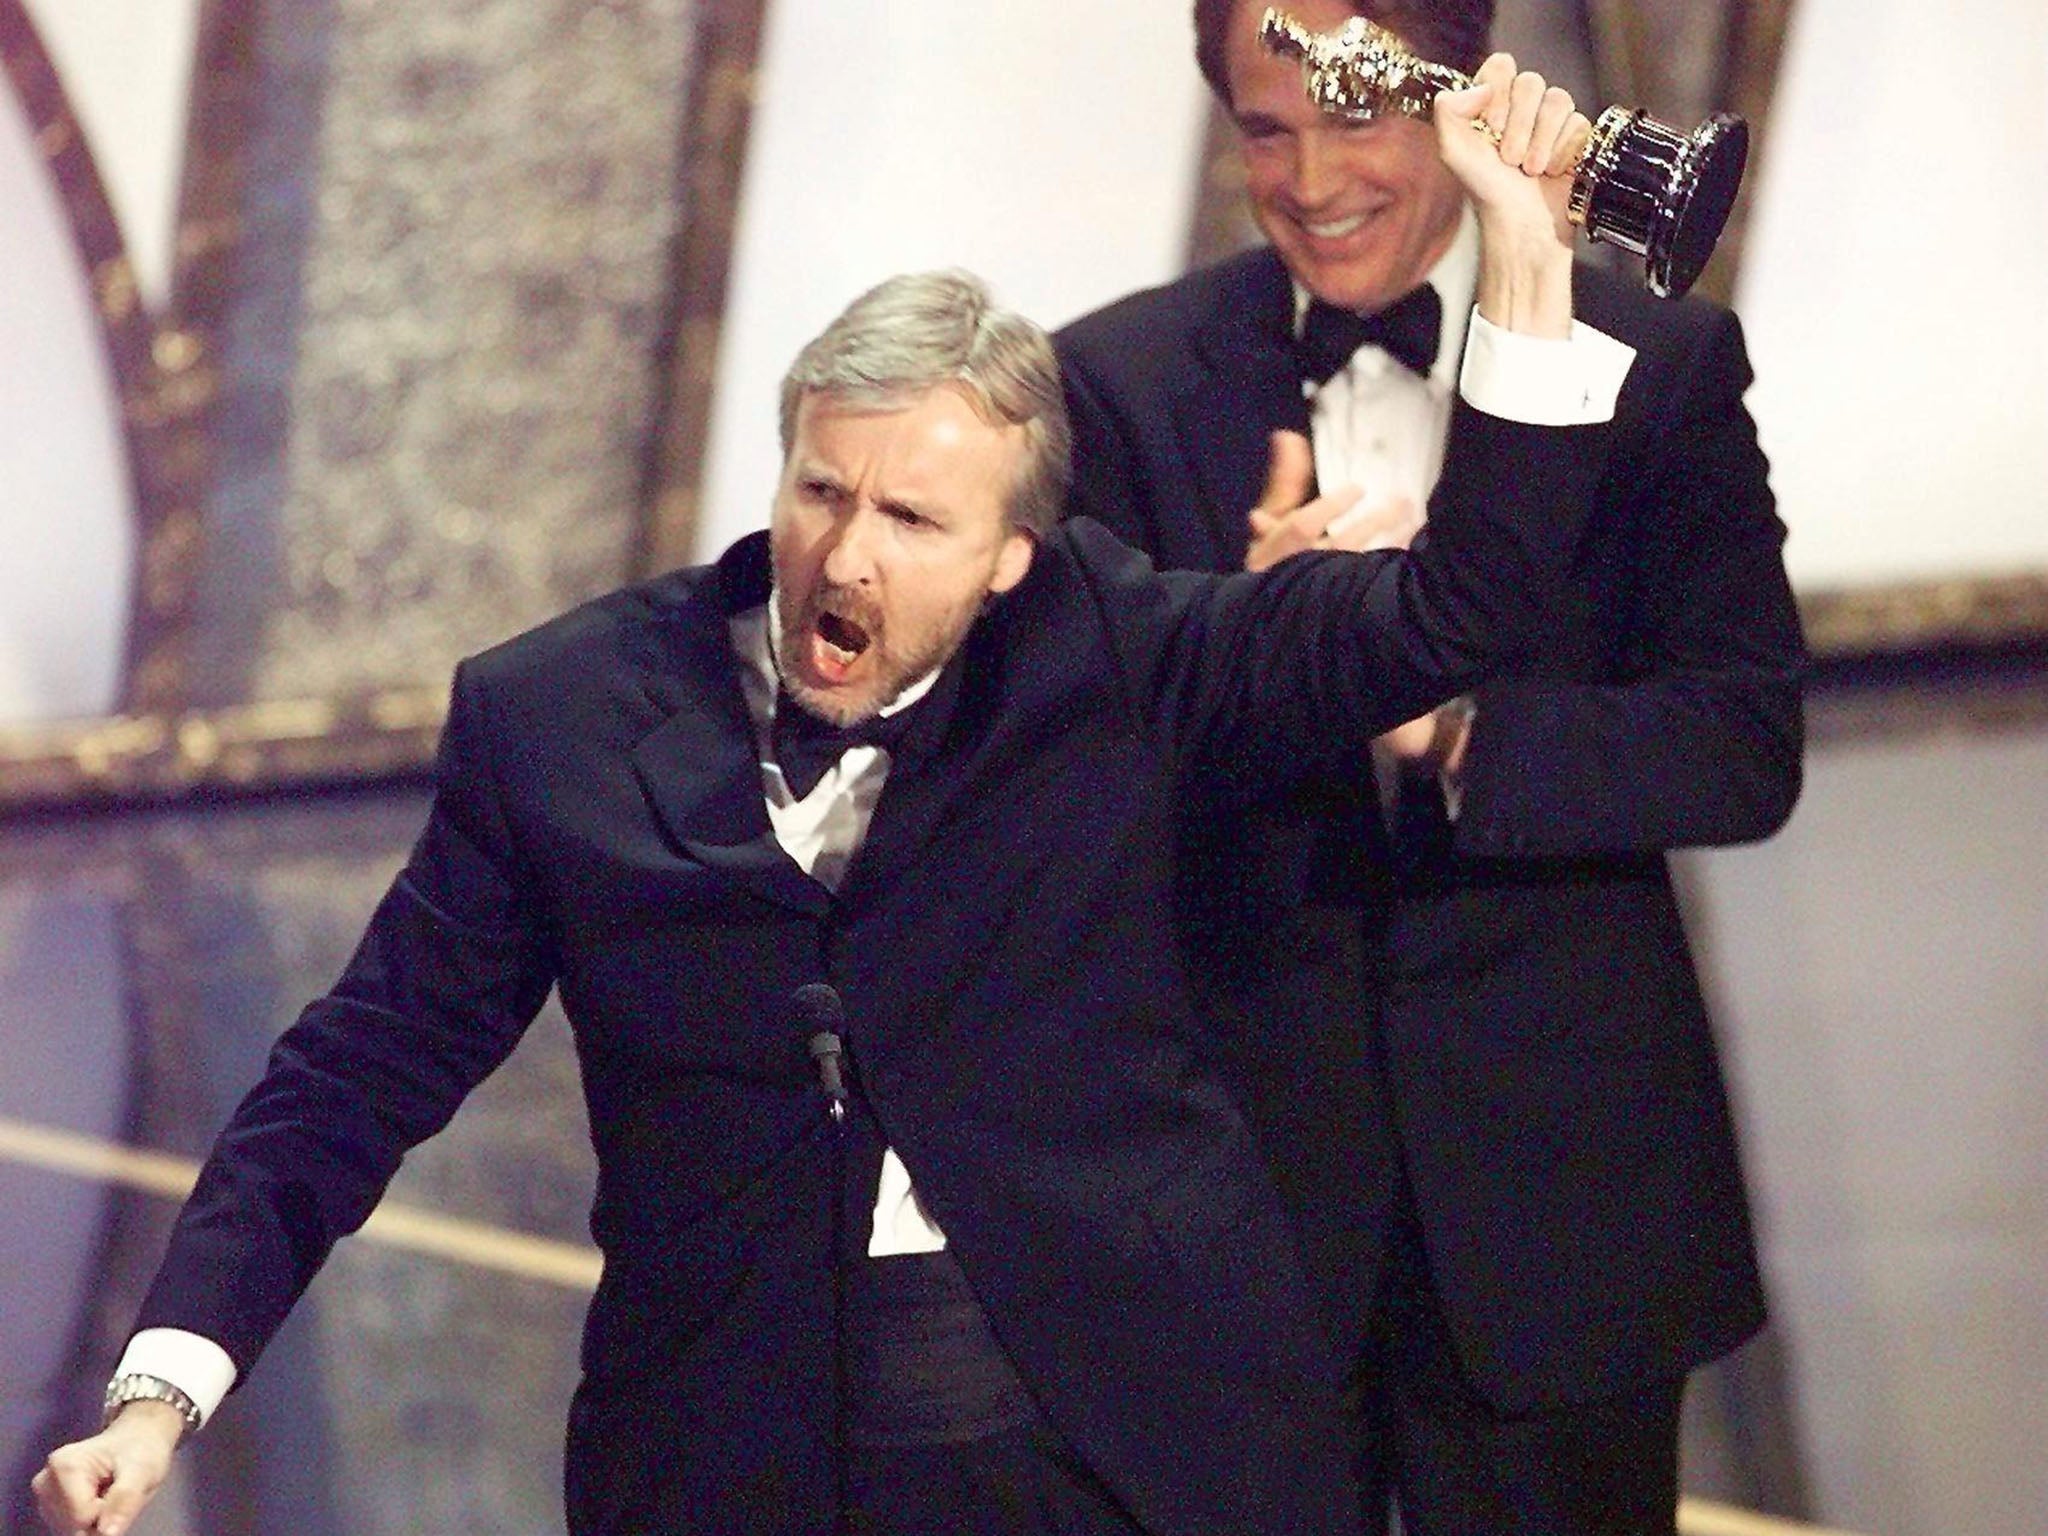 James Cameron wins Best Director at the 70th Academy Awards